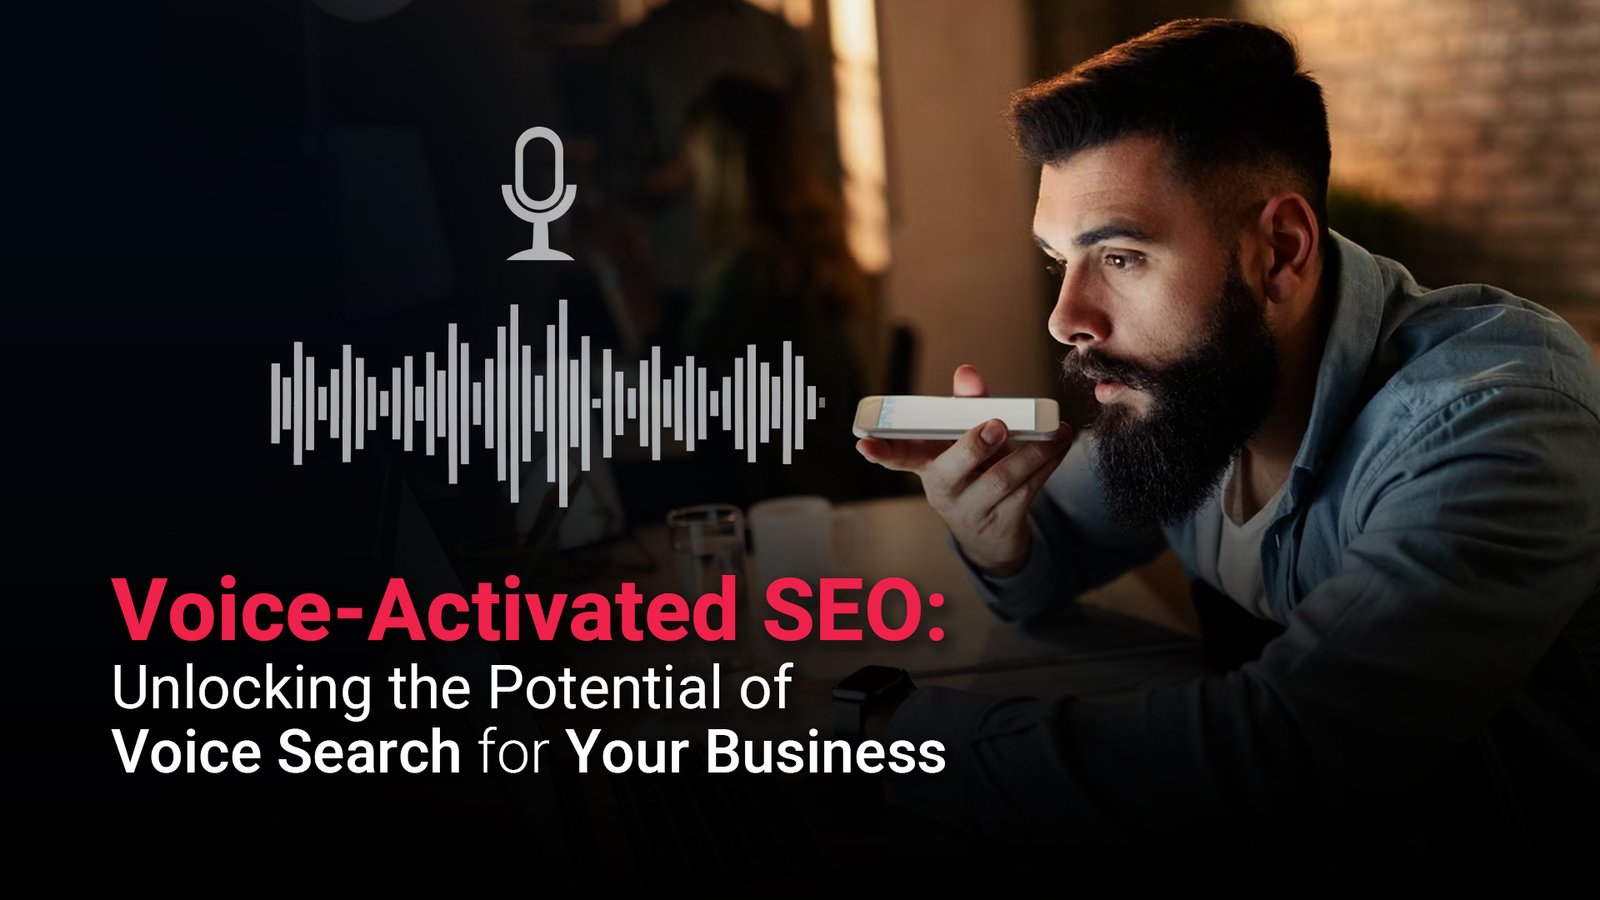 Voice-Activated SEO: Unlocking the Potential ofVoice Search for Your Business